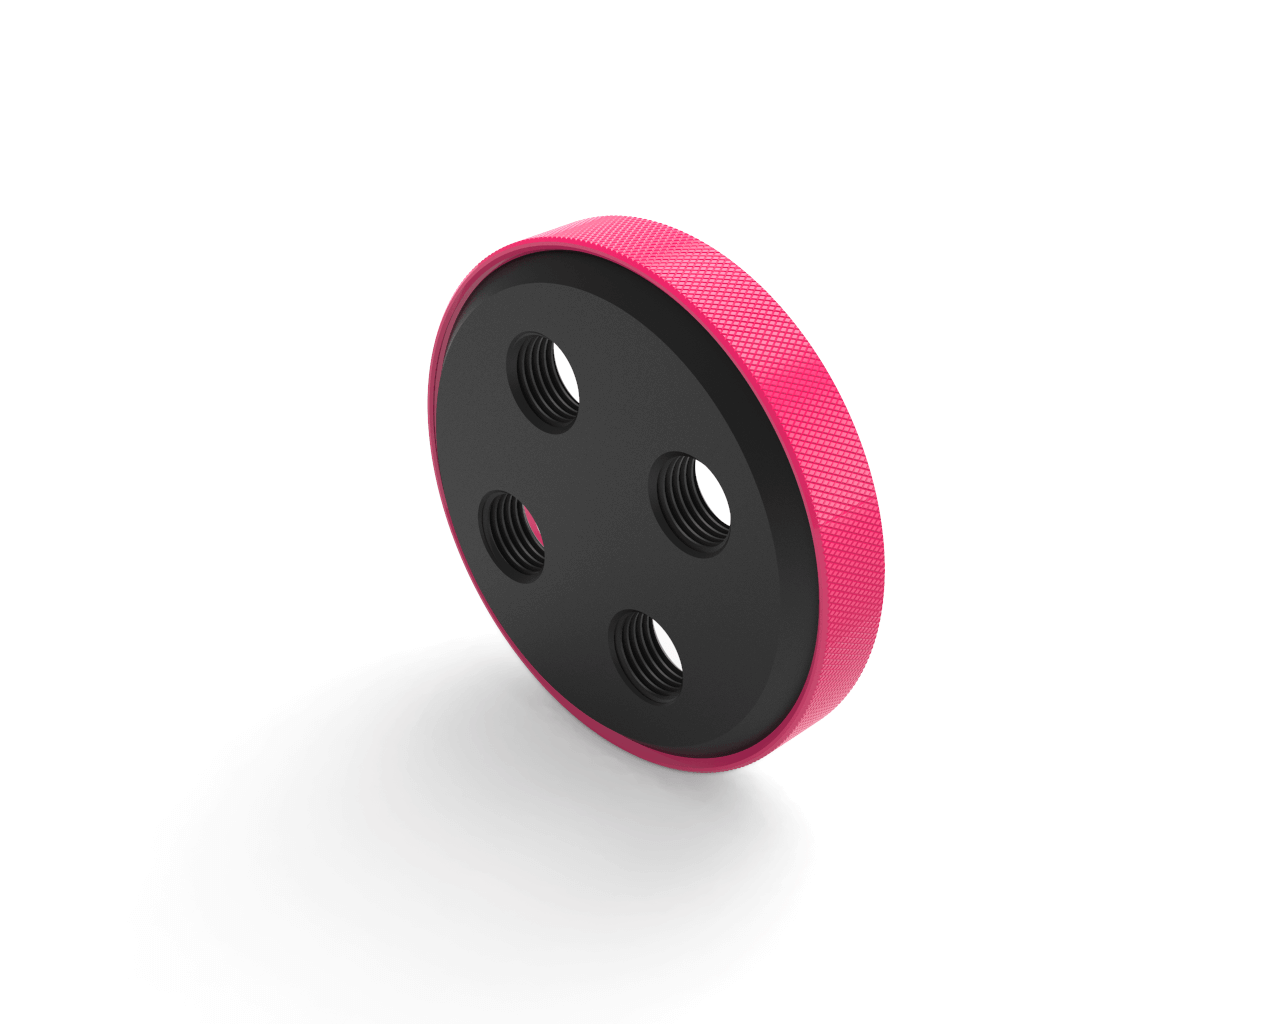 PrimoChill CTR Replacement SX Compression Ring - PrimoChill - KEEPING IT COOL UV Pink